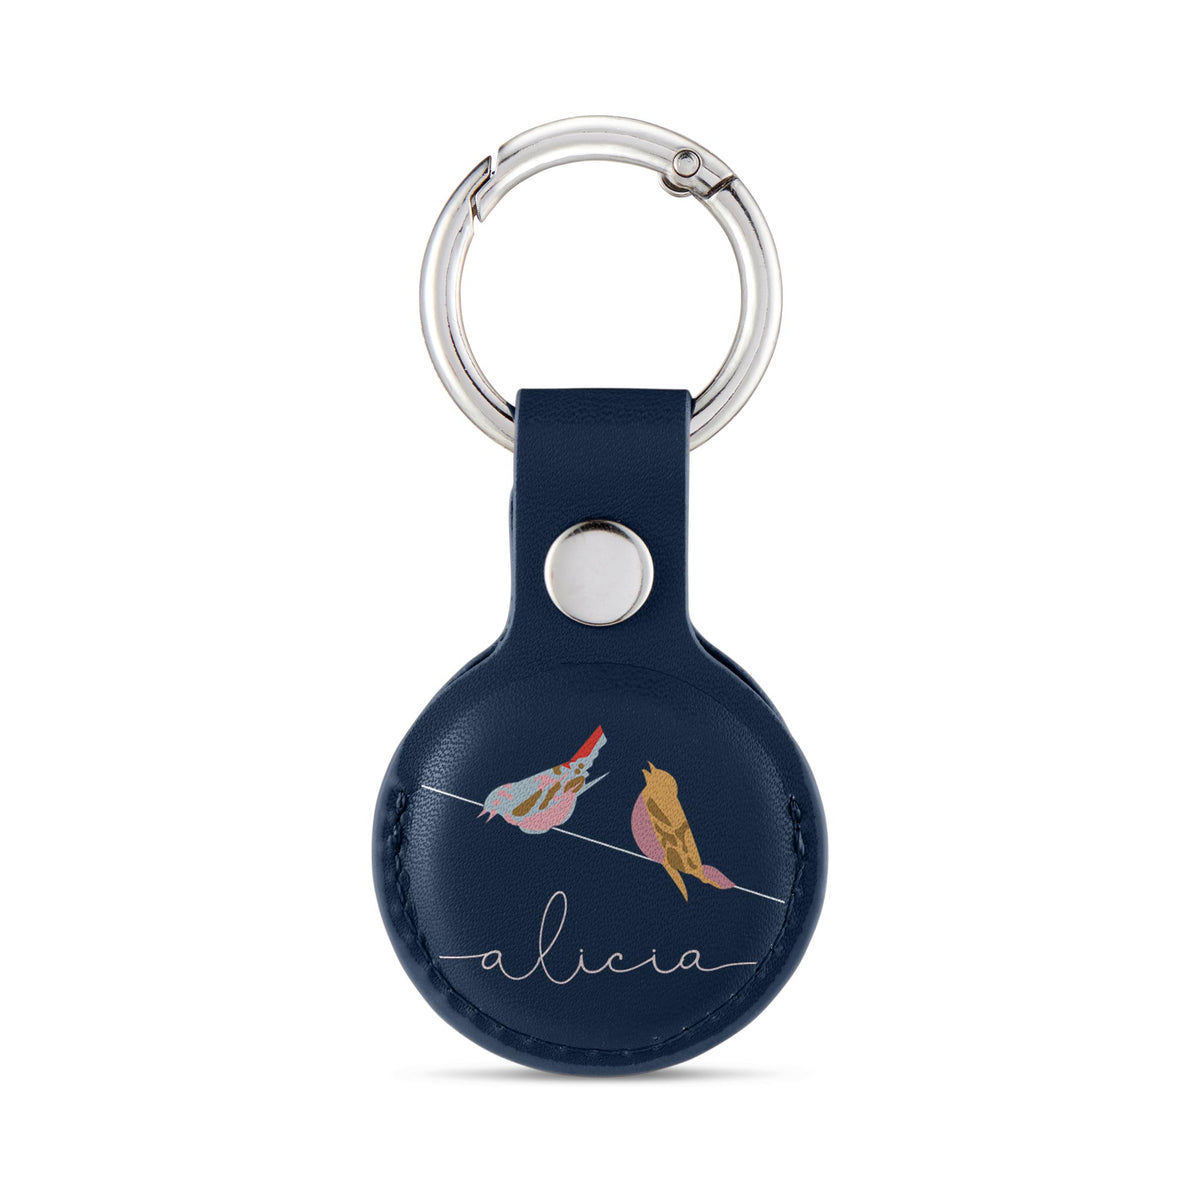 Personalised AirTag Case Keyring Holder Keychain Holder for Air Tag Tracking Device Birds Name Handwritten on Blue